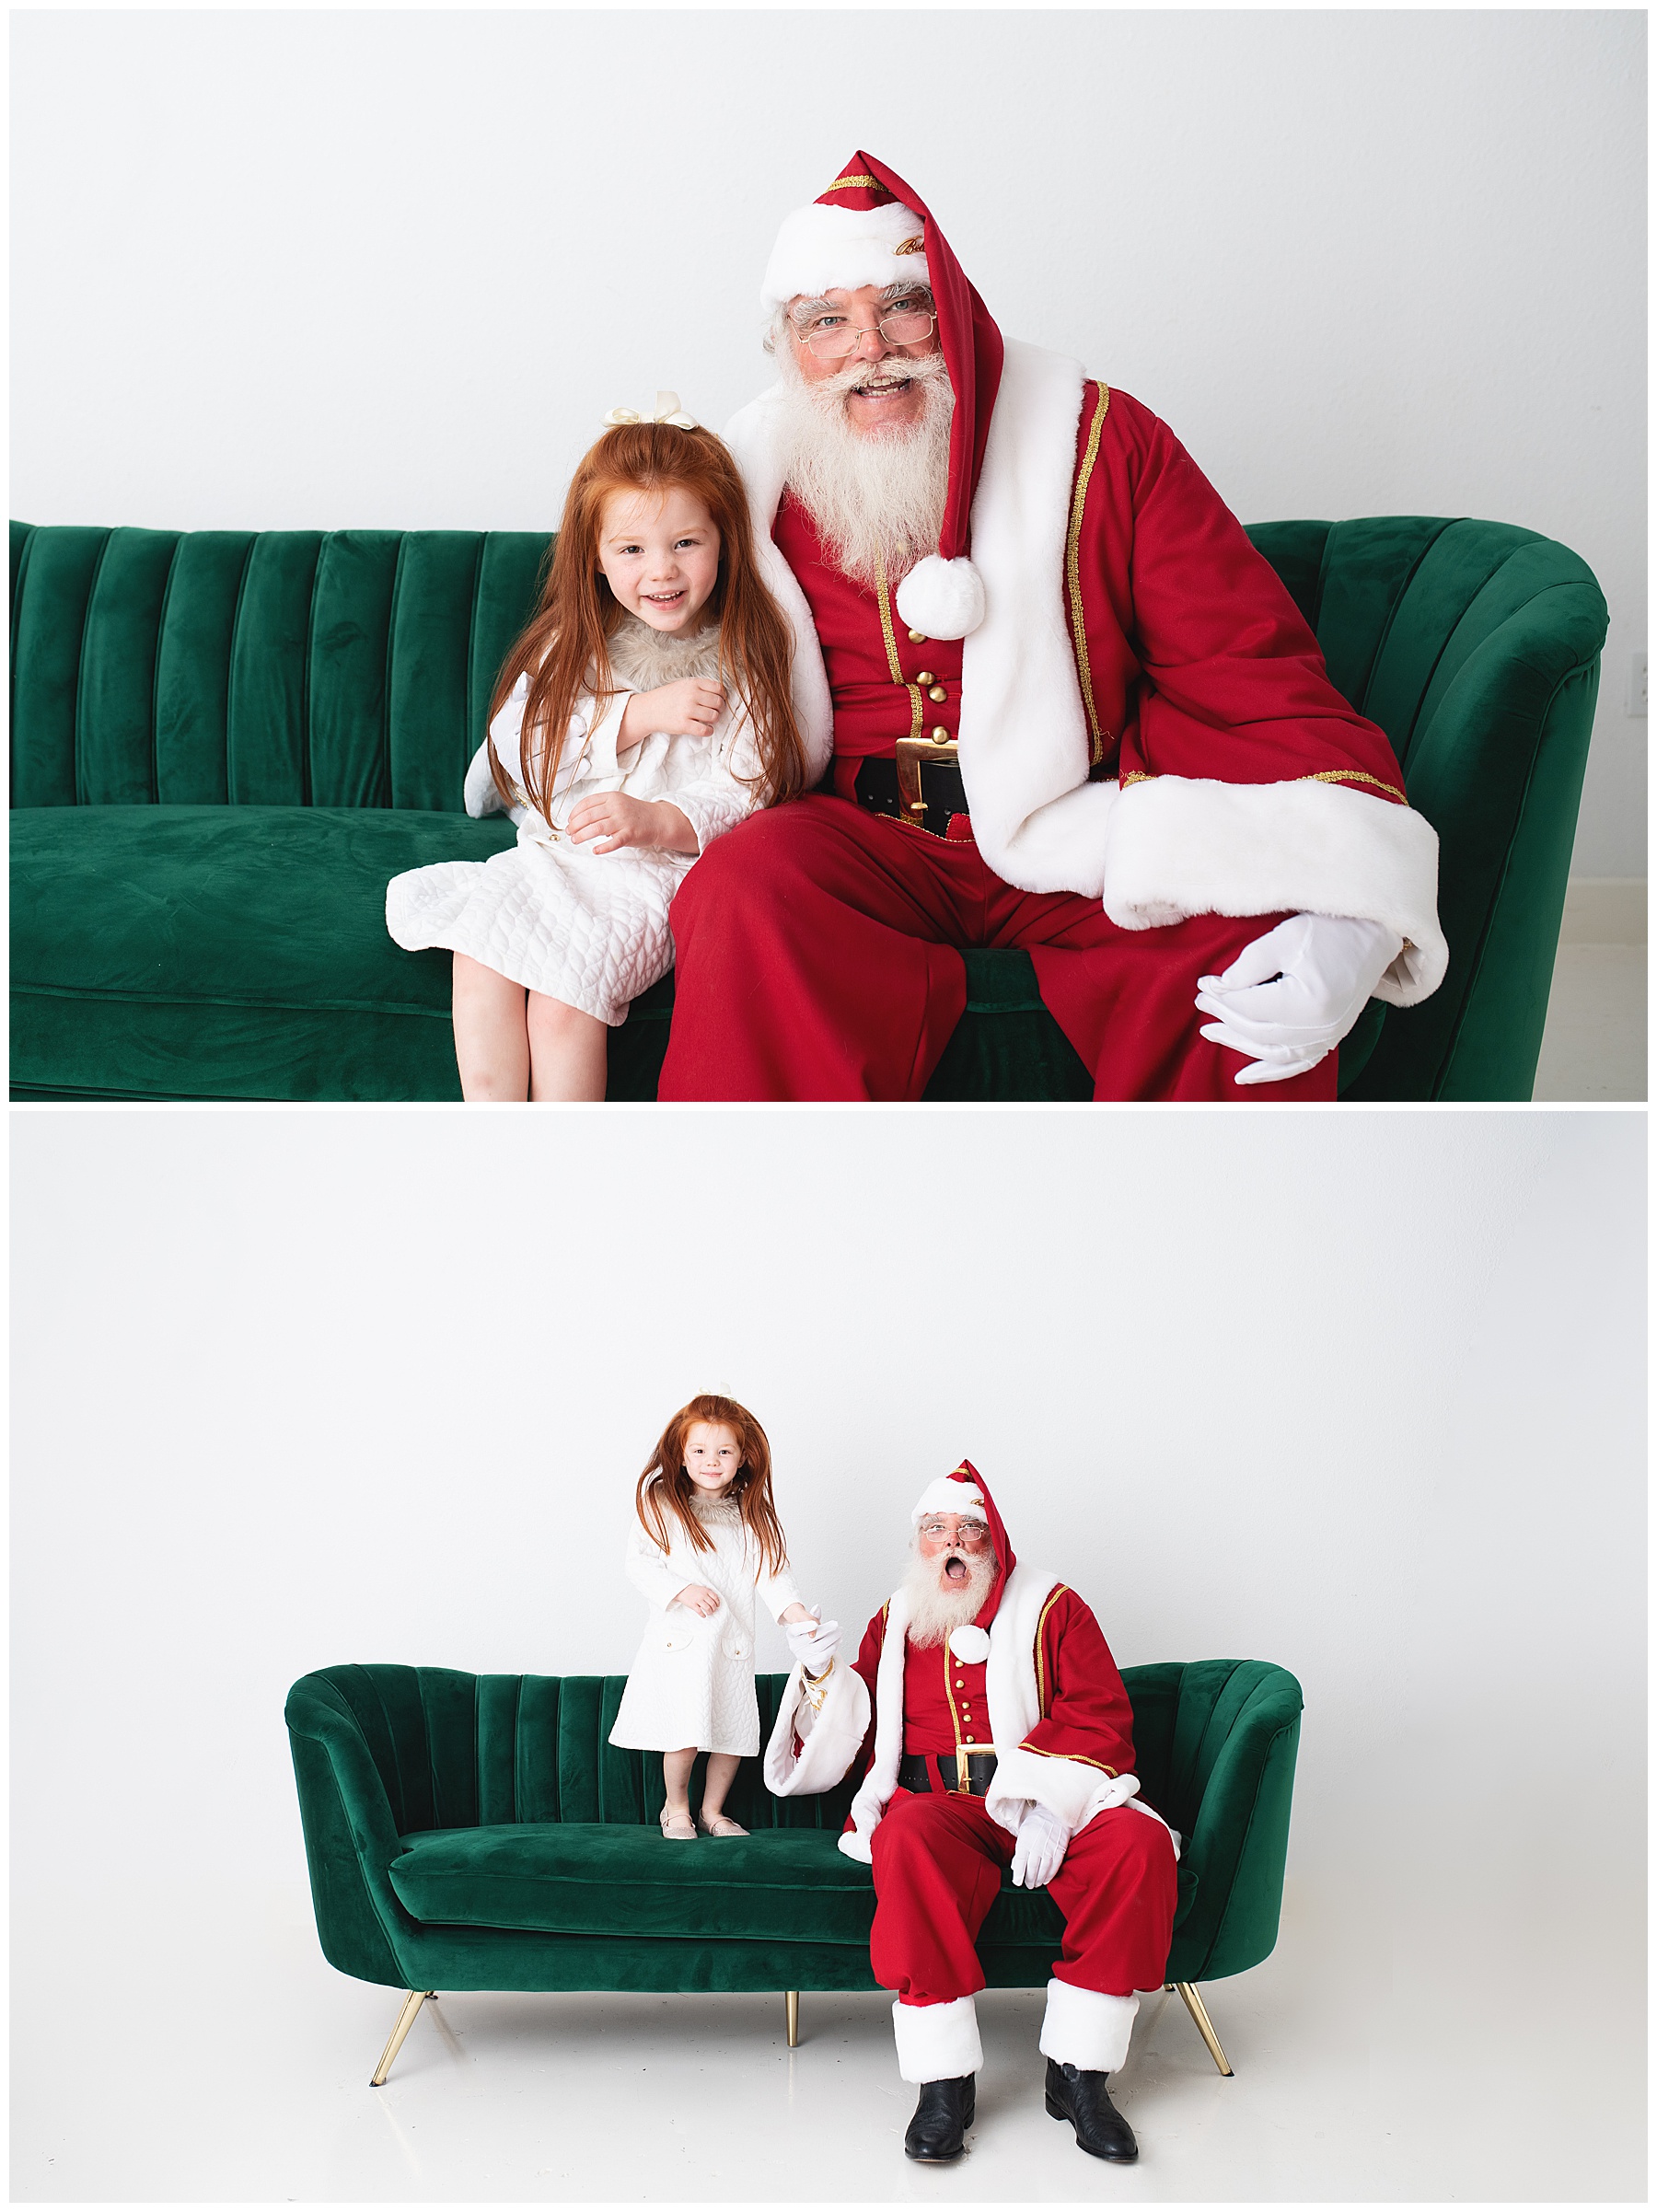 excited little girl jumping on the couch with Santa